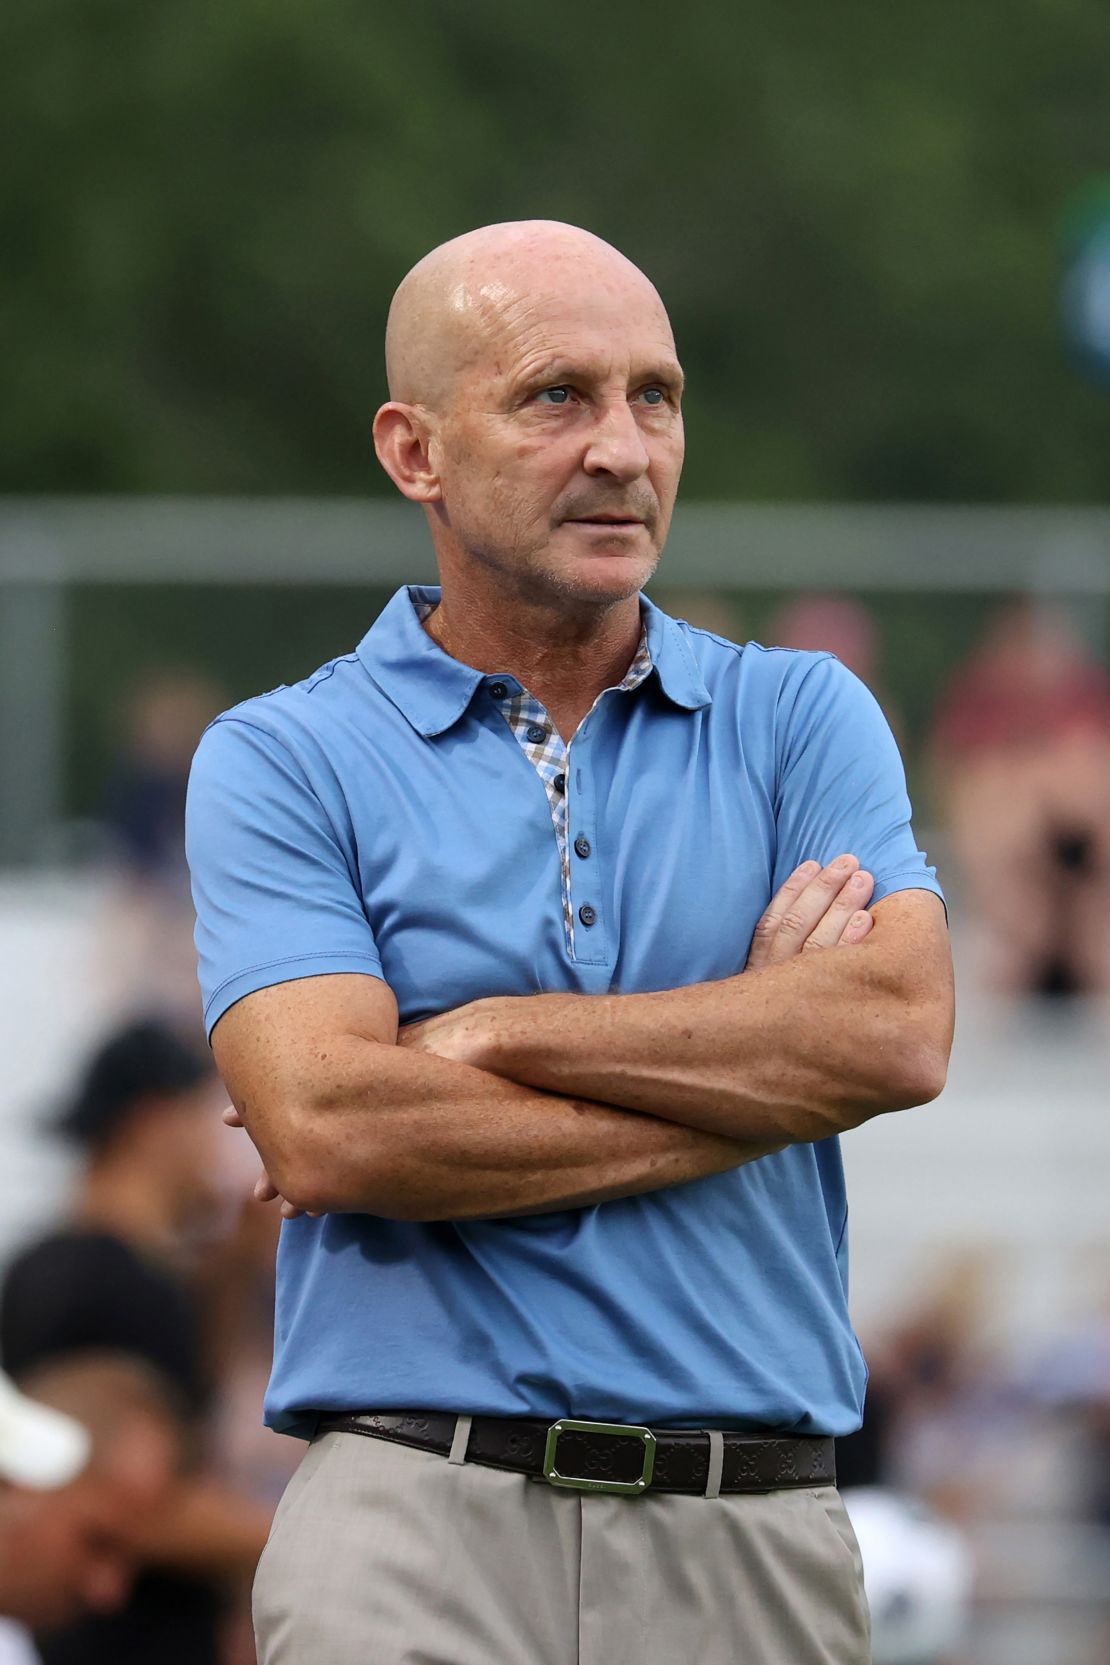 Paul Riley, formerly the head coach of the North Carolina Courage, was named in an investigation of abuse in women's soccer. Riley has denied the allegations players have made against him.